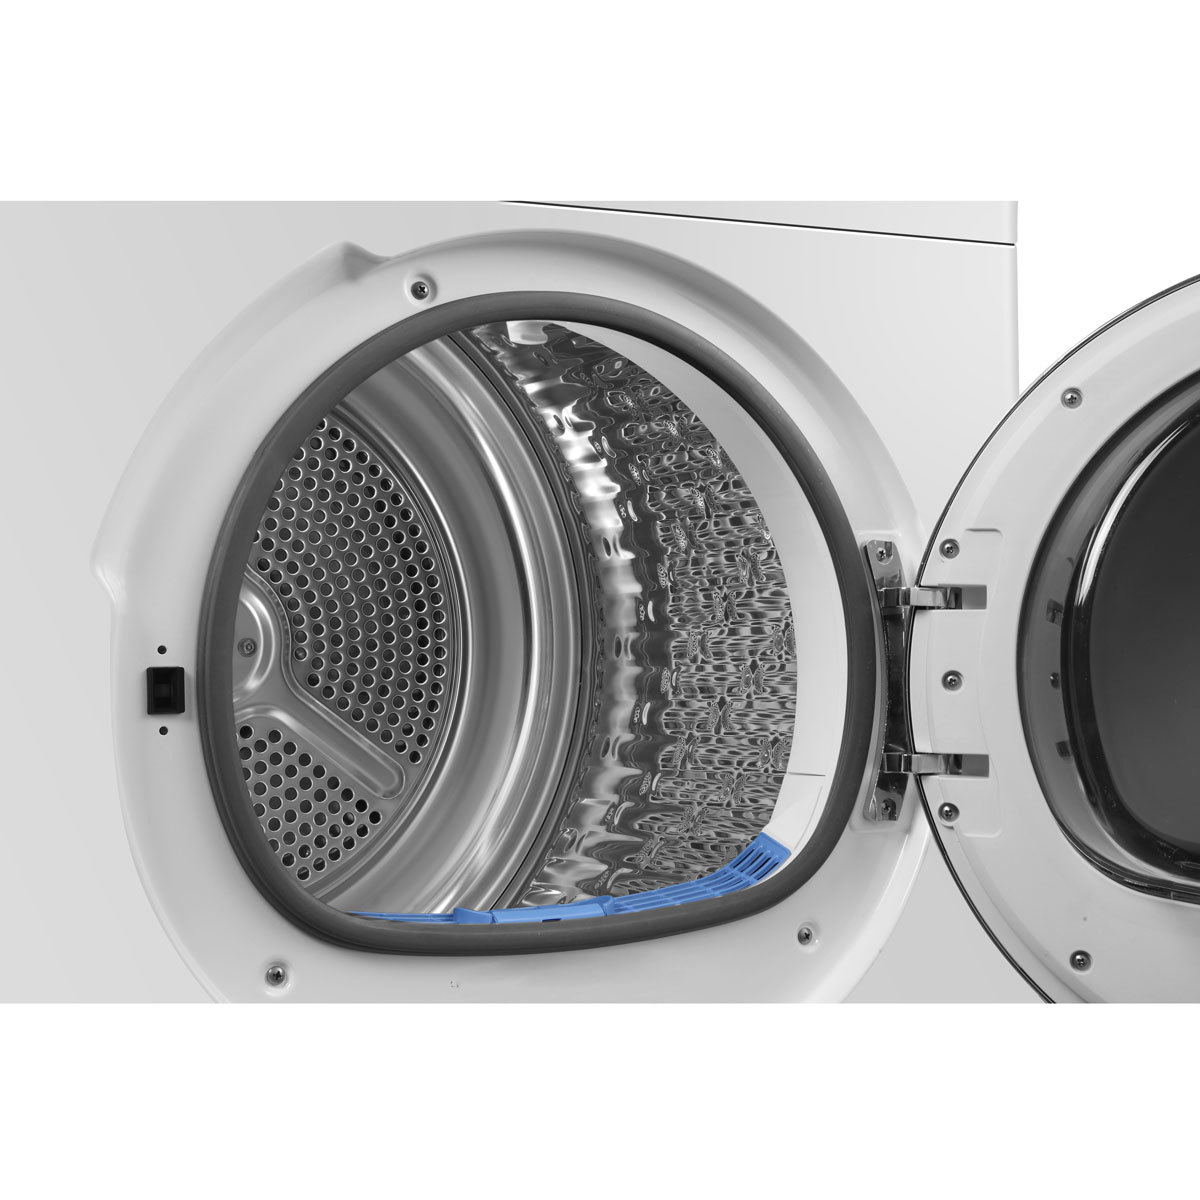 Haier HD90-A636, 9kg, Heat Pump Tumble Dryer A++ Rated in White